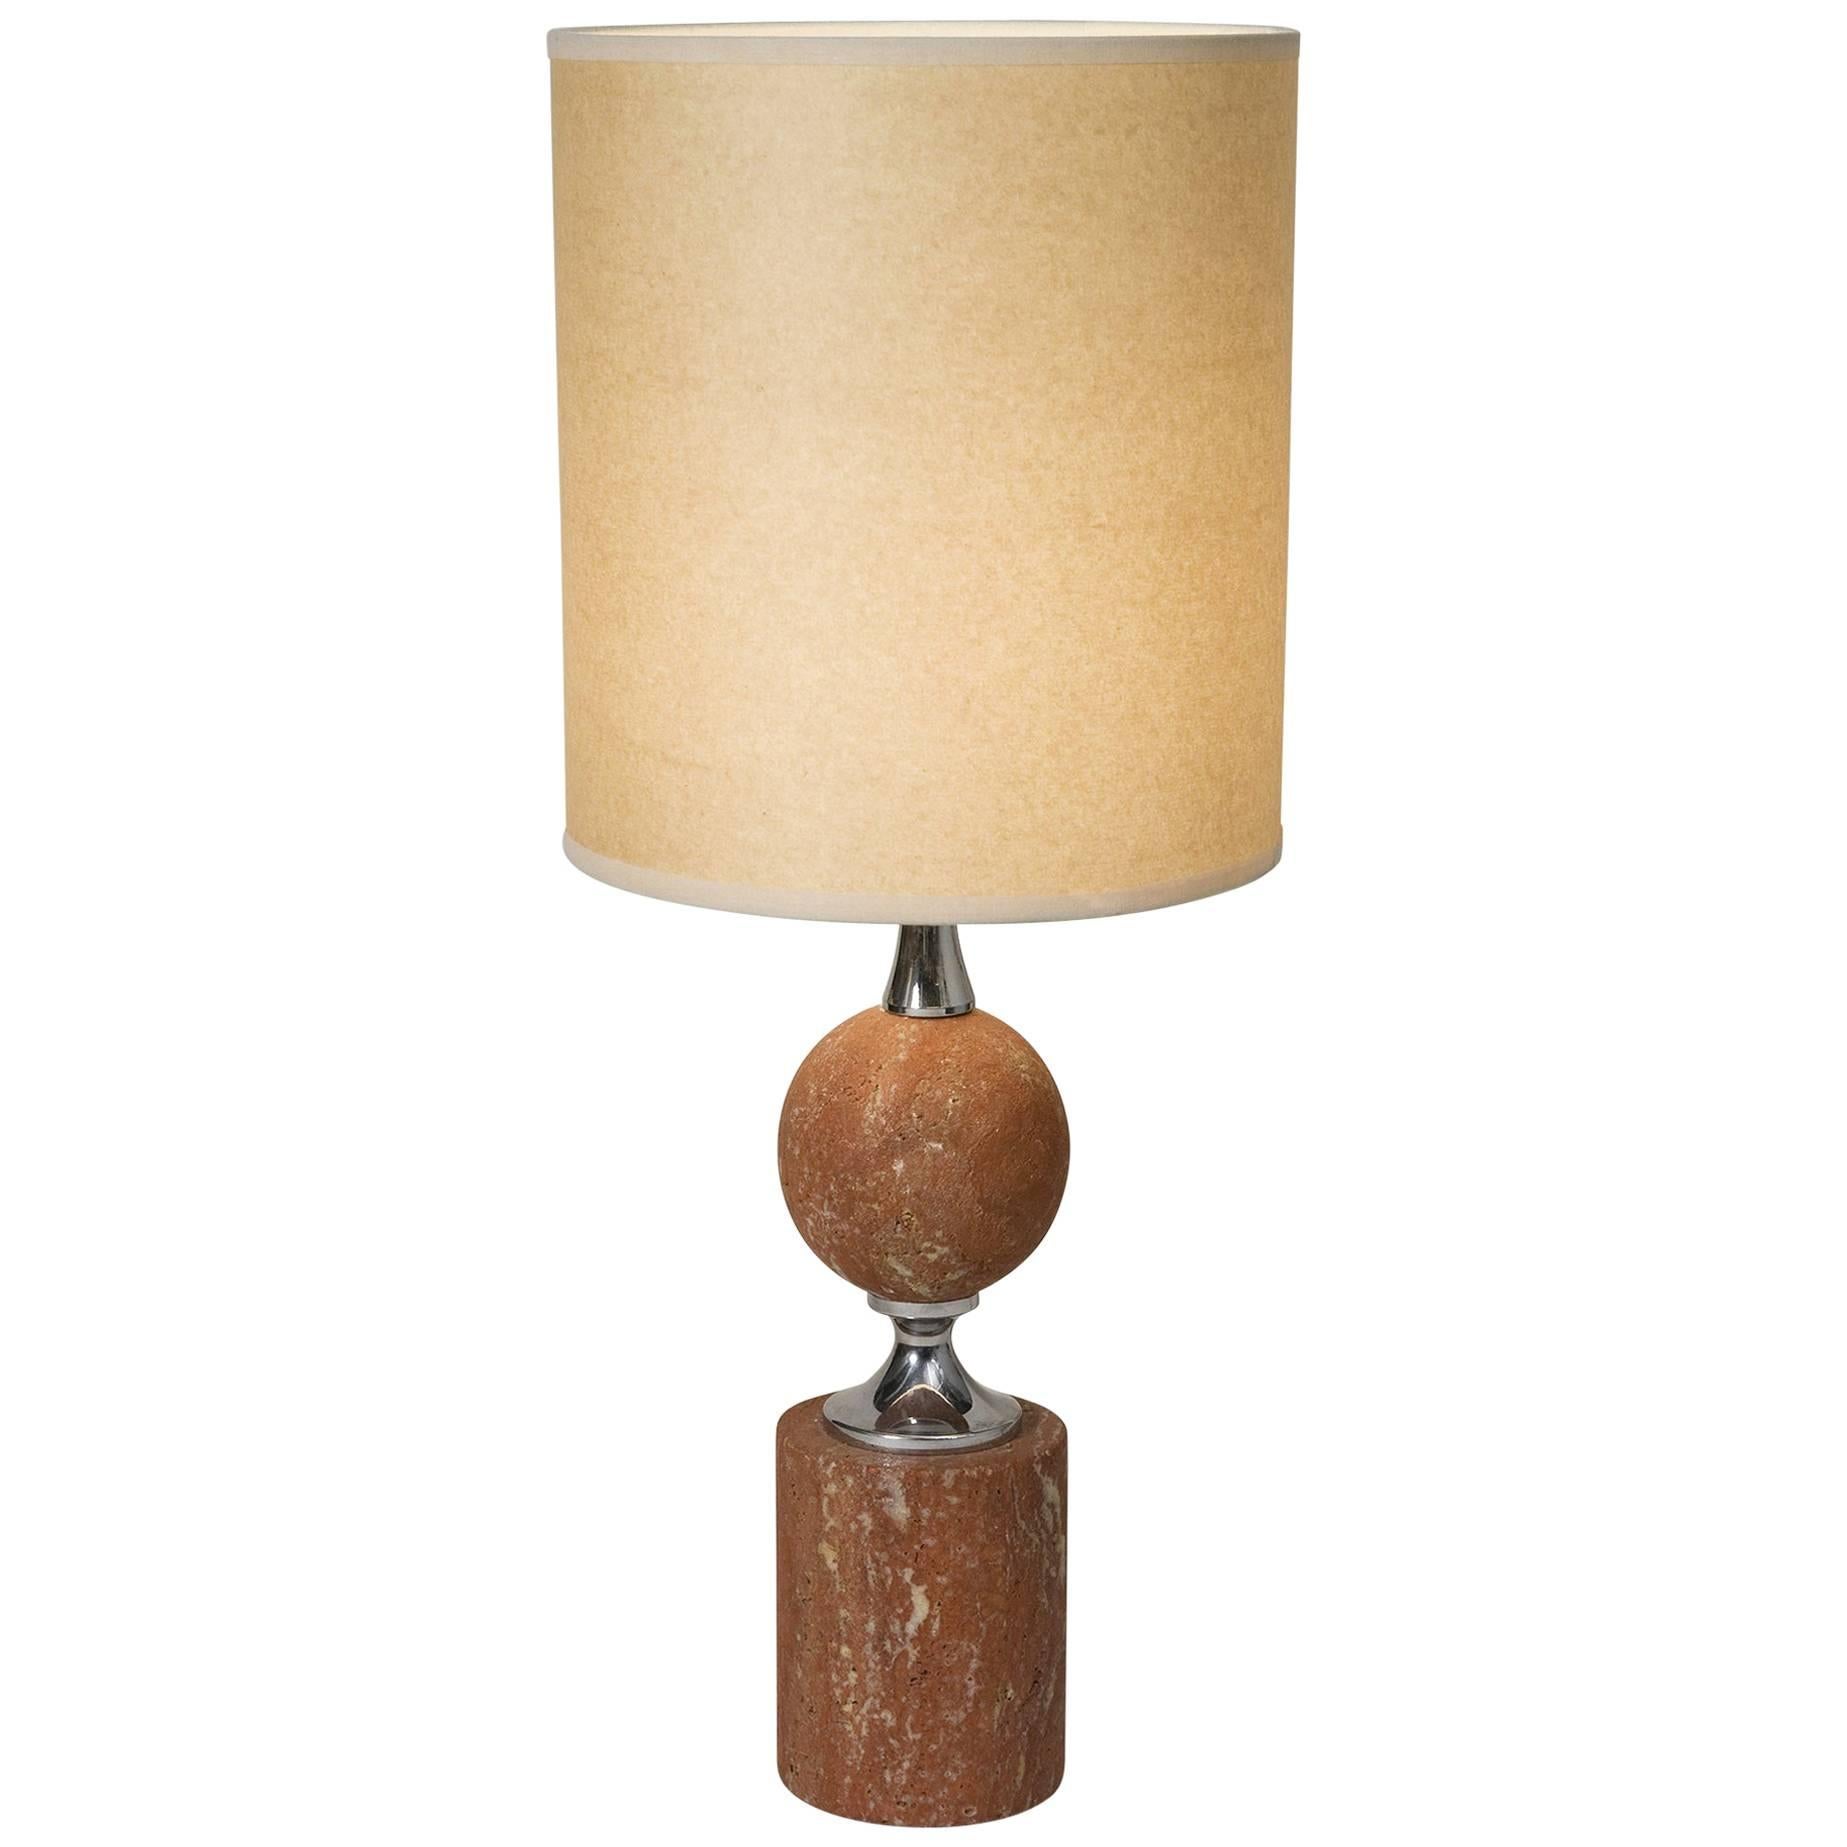 Rouge Travertine Table Lamp by Barbier, French, 1970s For Sale